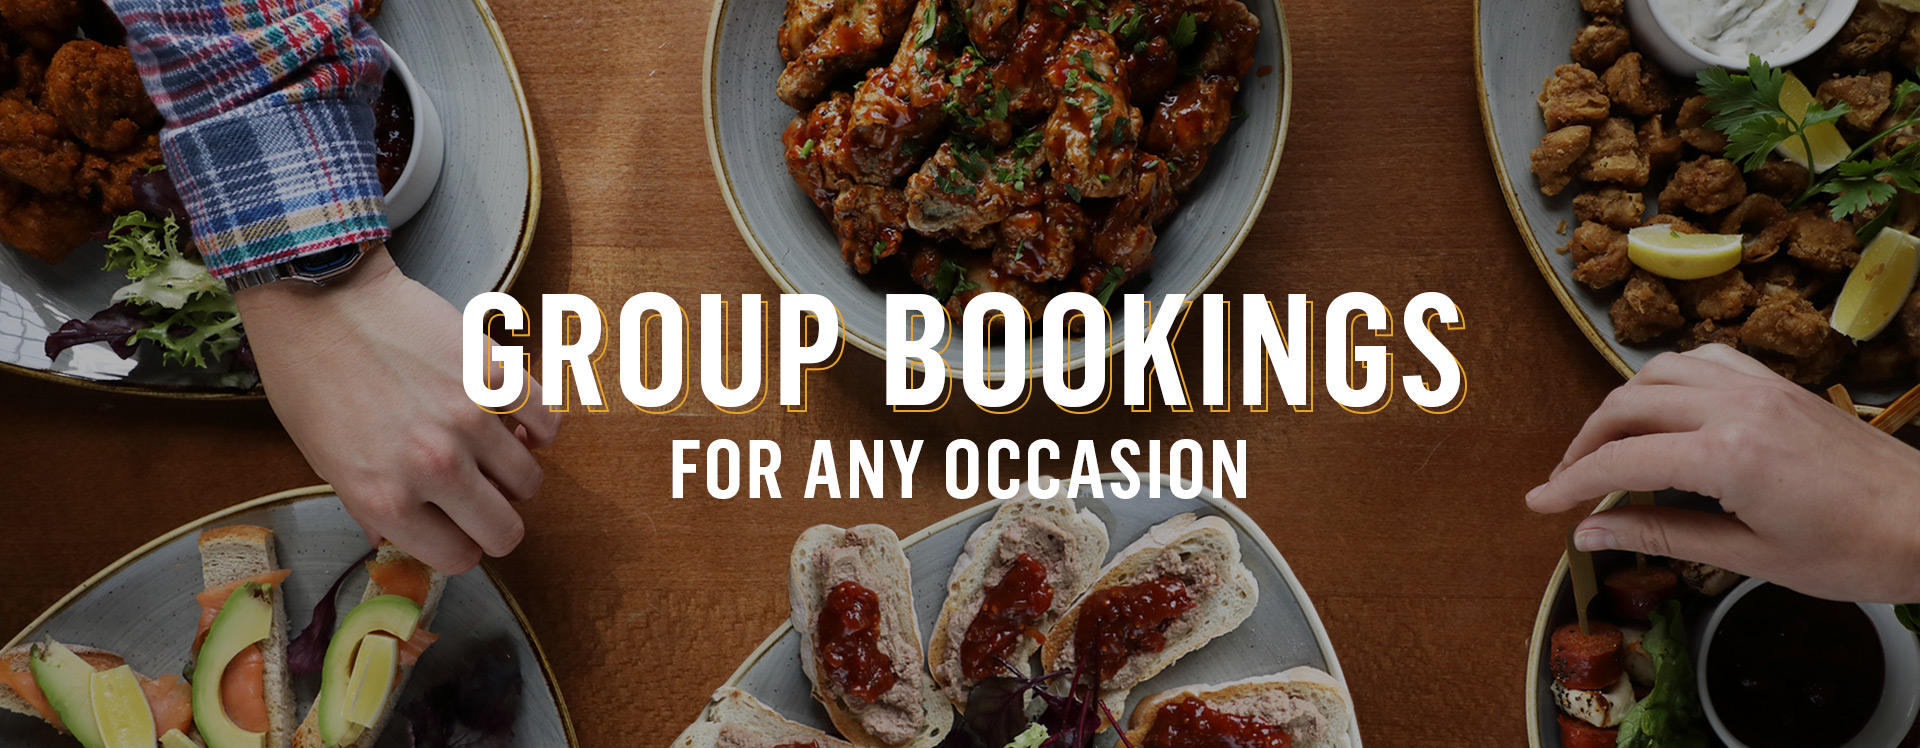 Group Bookings at The Crooked Billet